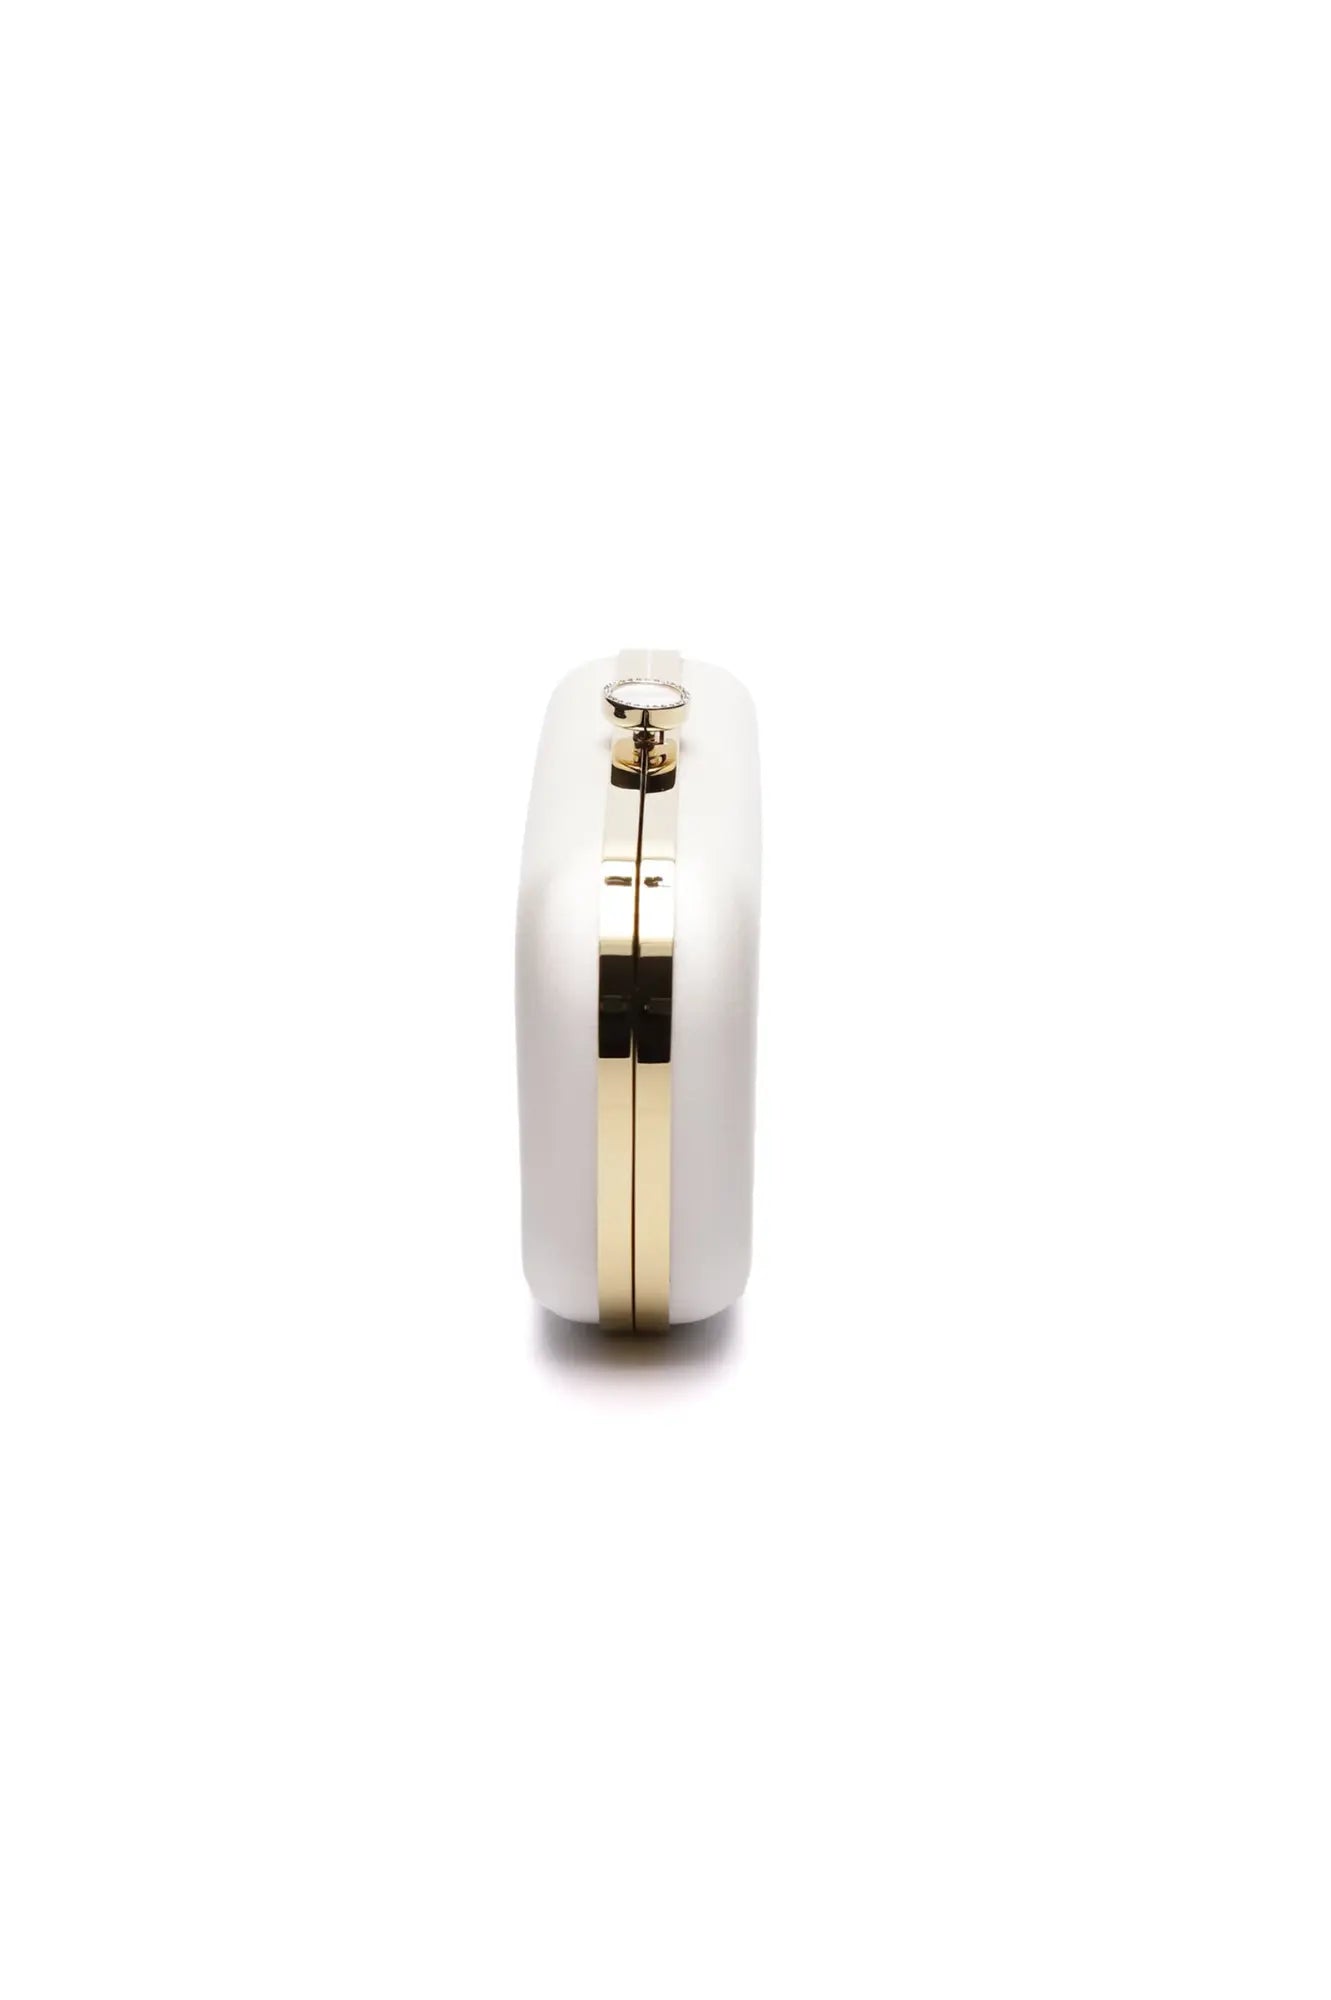 A white and gold cylindrical object with a metallic finish on a white background, identified as the Bella Clutch Ivory Grande from The Bella Rosa Collection, an exquisite bespoke bridal accessory.